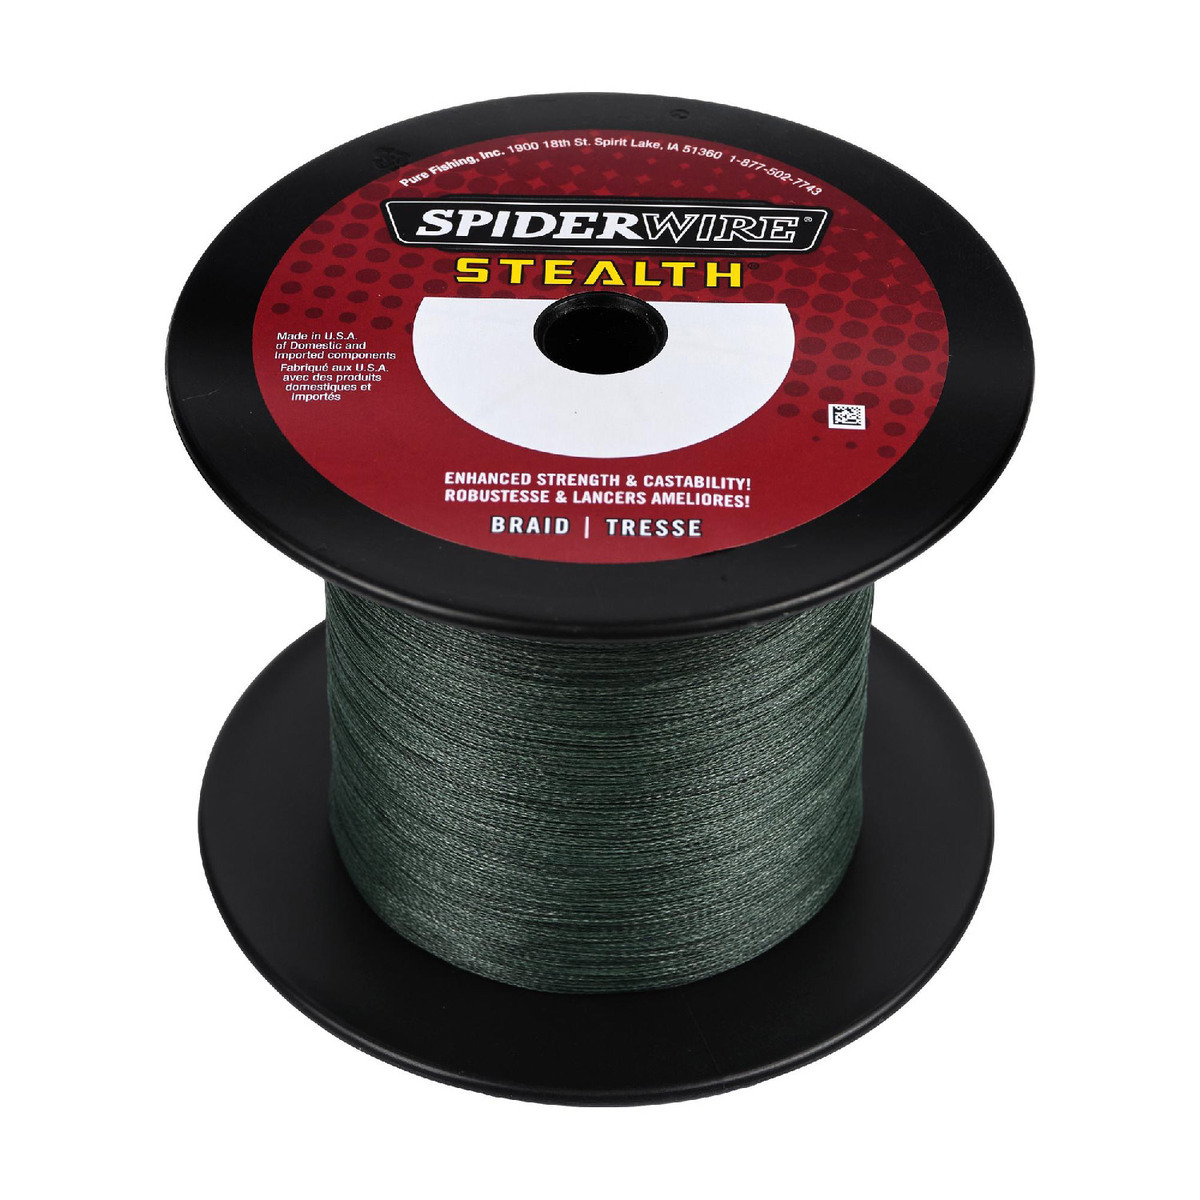 SpiderWire Stealth Fishing Line - Moss Green